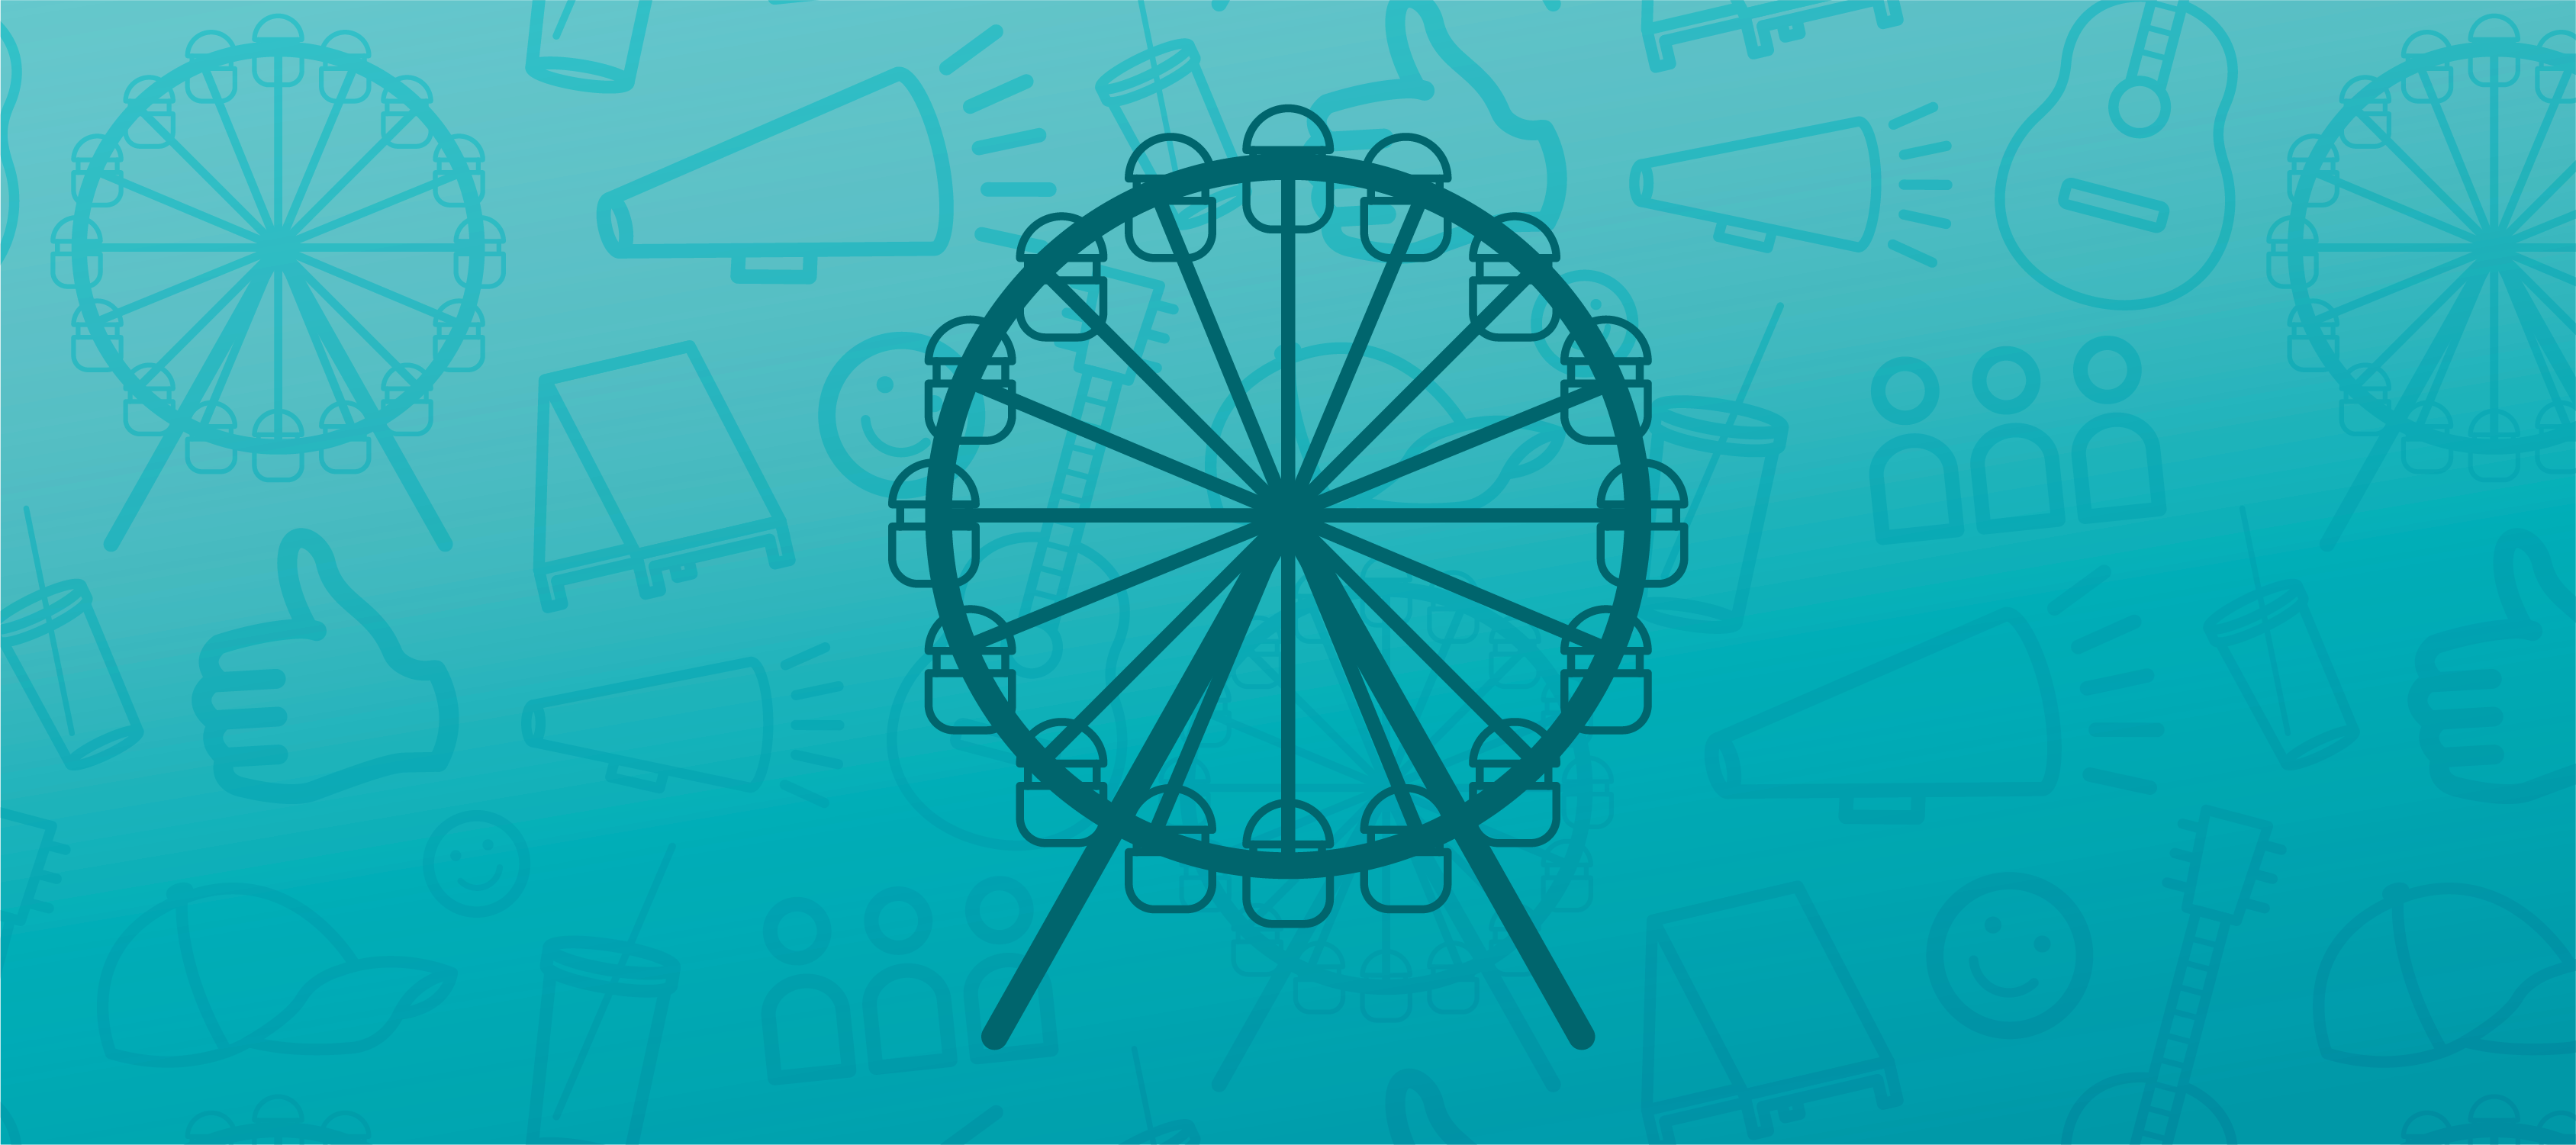 A blue header image featuring an icon of a ferris wheel in the center and faded event icons in the background